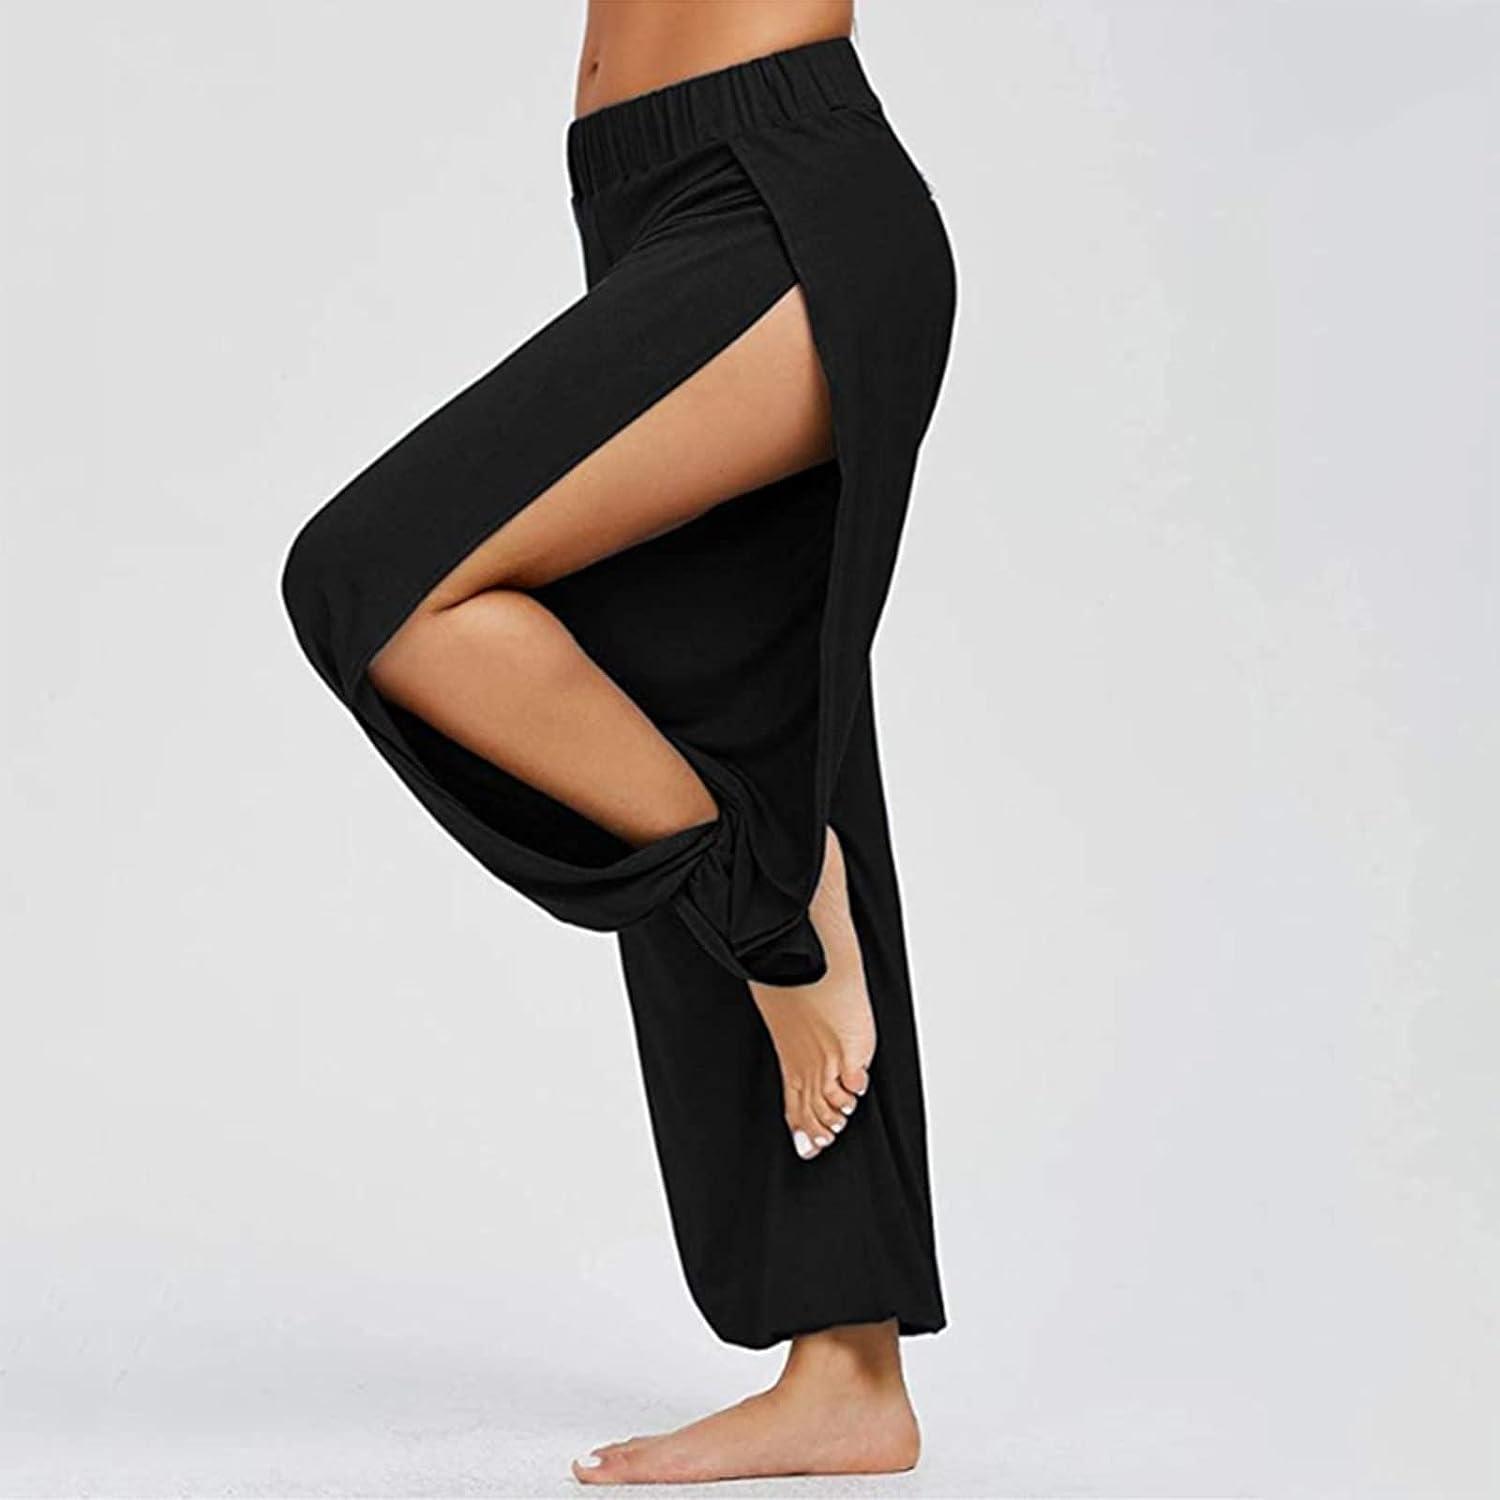 Serving Looks, Pants & Jumpsuits, Butt Lifting Black Leggings Stretch  High Waisted Athletic Yoga Pant Scrunch Butt